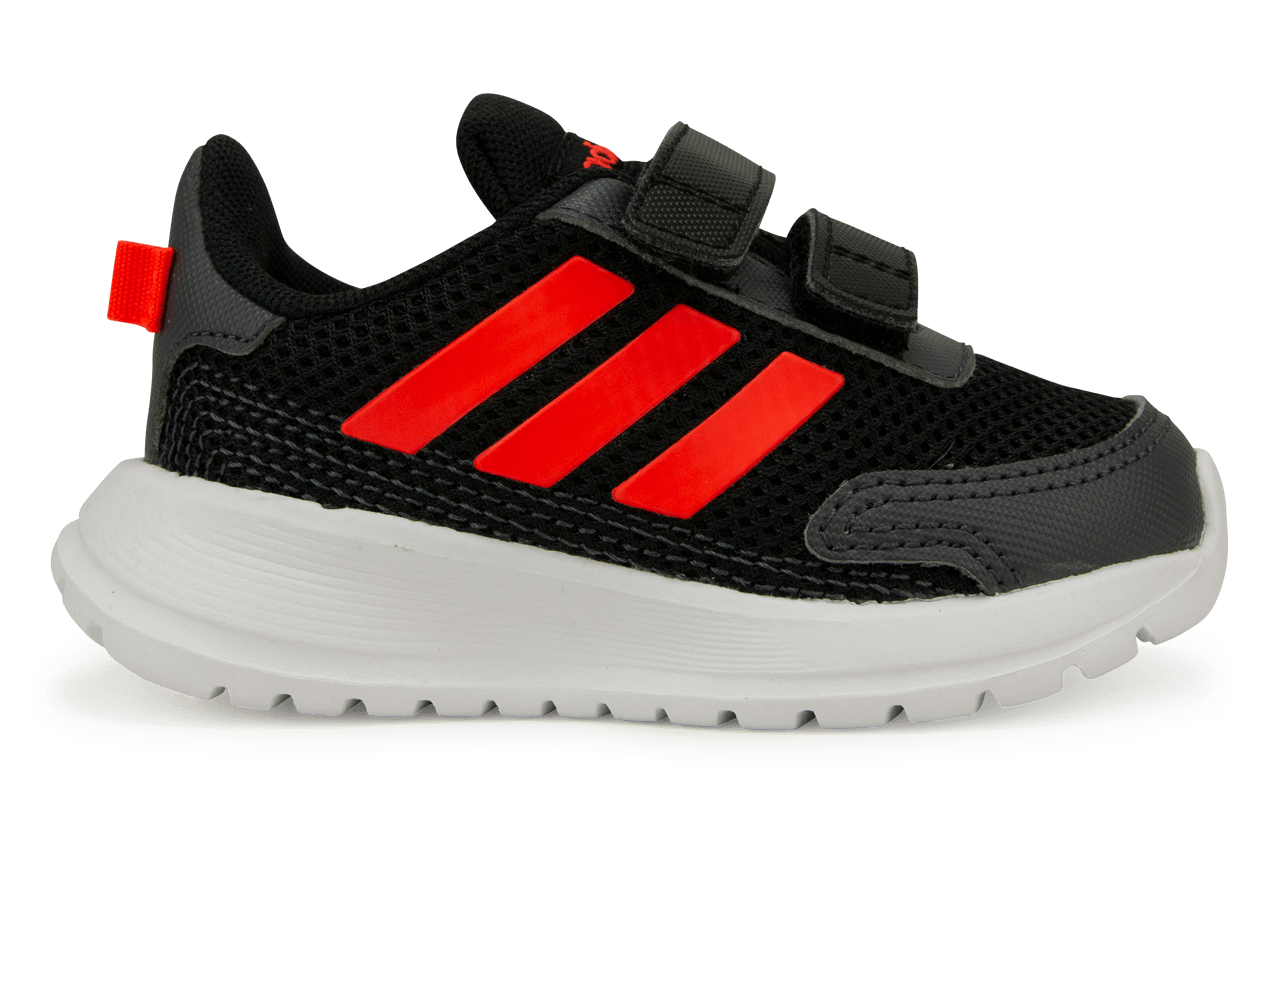 adidas Toddlers Tesnor Run I Shoes Black/White/Red Side